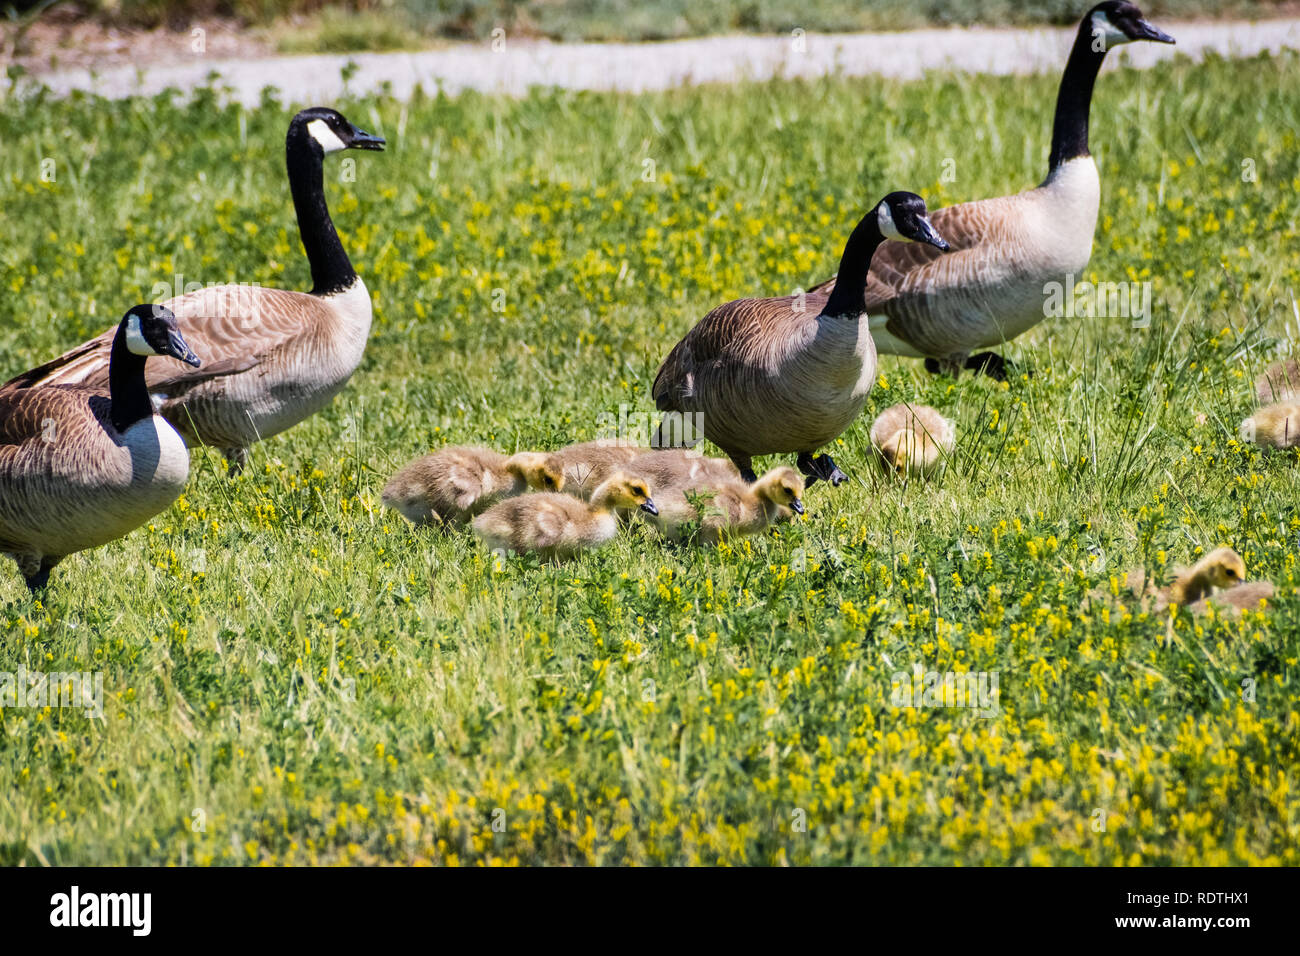 Canada Goose (Branta canadensis) new born chicks surrounded by adult geese on a green meadow, San Francisco bay area, California Stock Photo